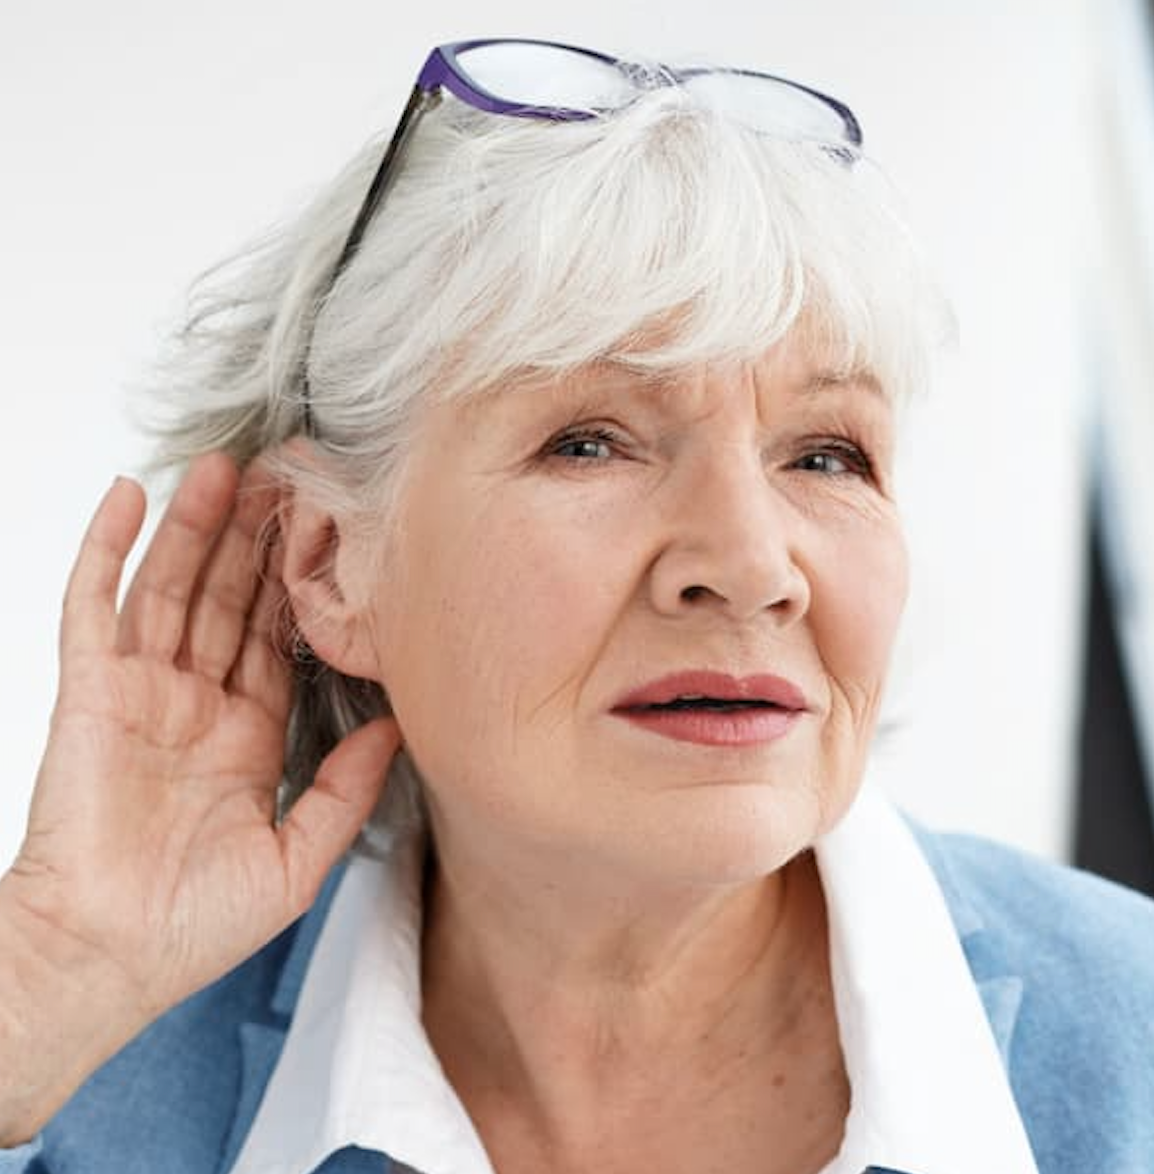 Hyperuricemia Linked to Hearing Impairment in Women, Elderly Patients